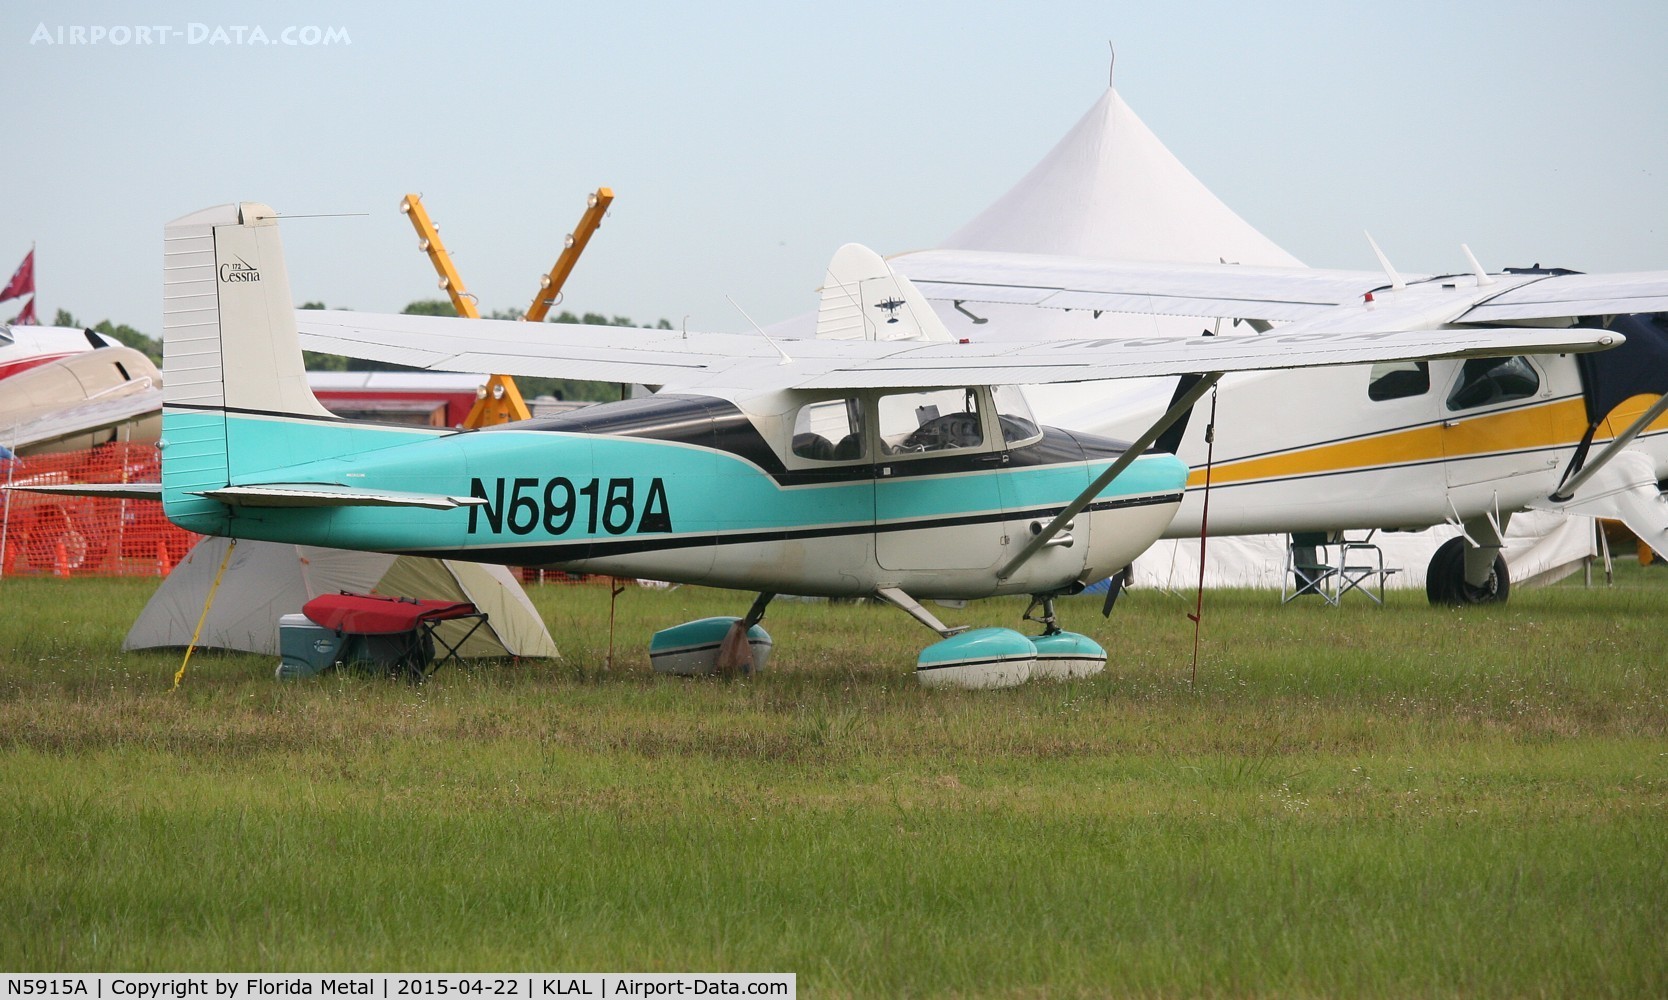 N5915A, 1956 Cessna 172 C/N 28515, Cessna 172 - with taped up numbers